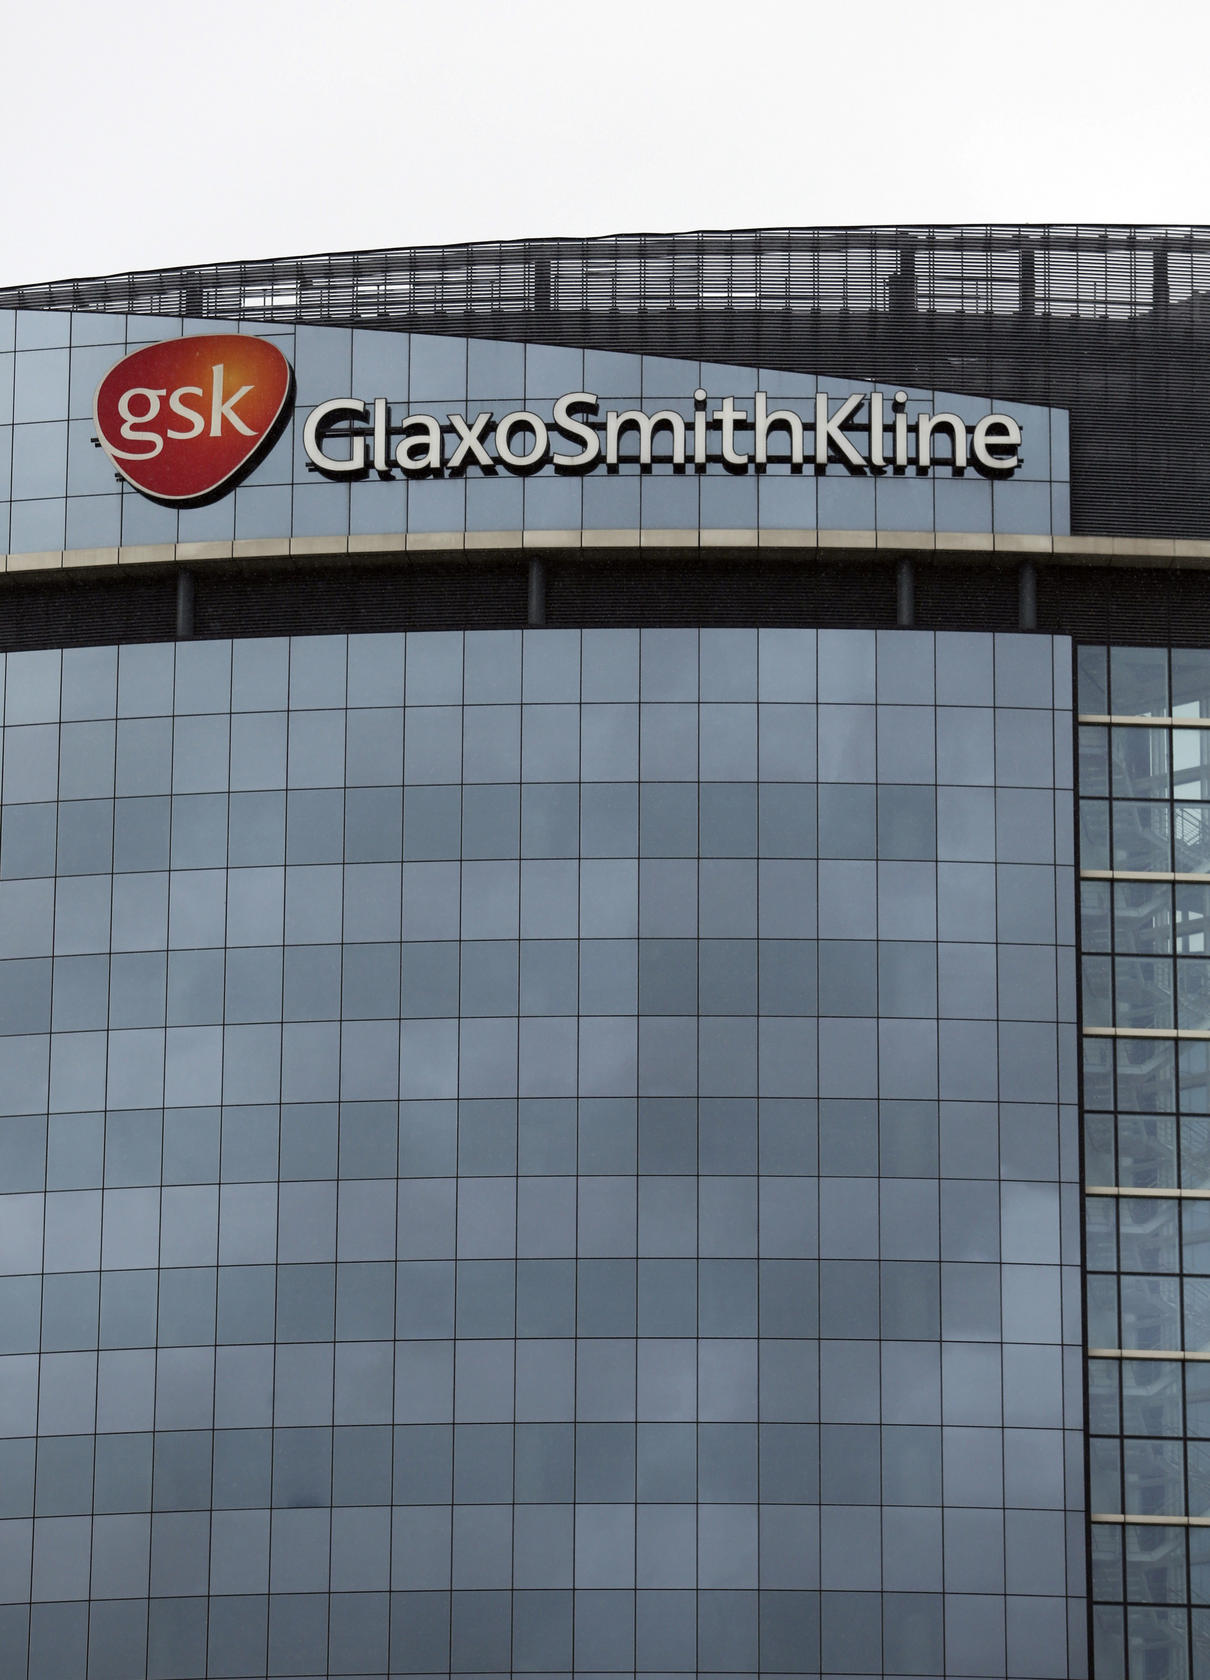 GSK is being investigated for suspected mainland bribery.